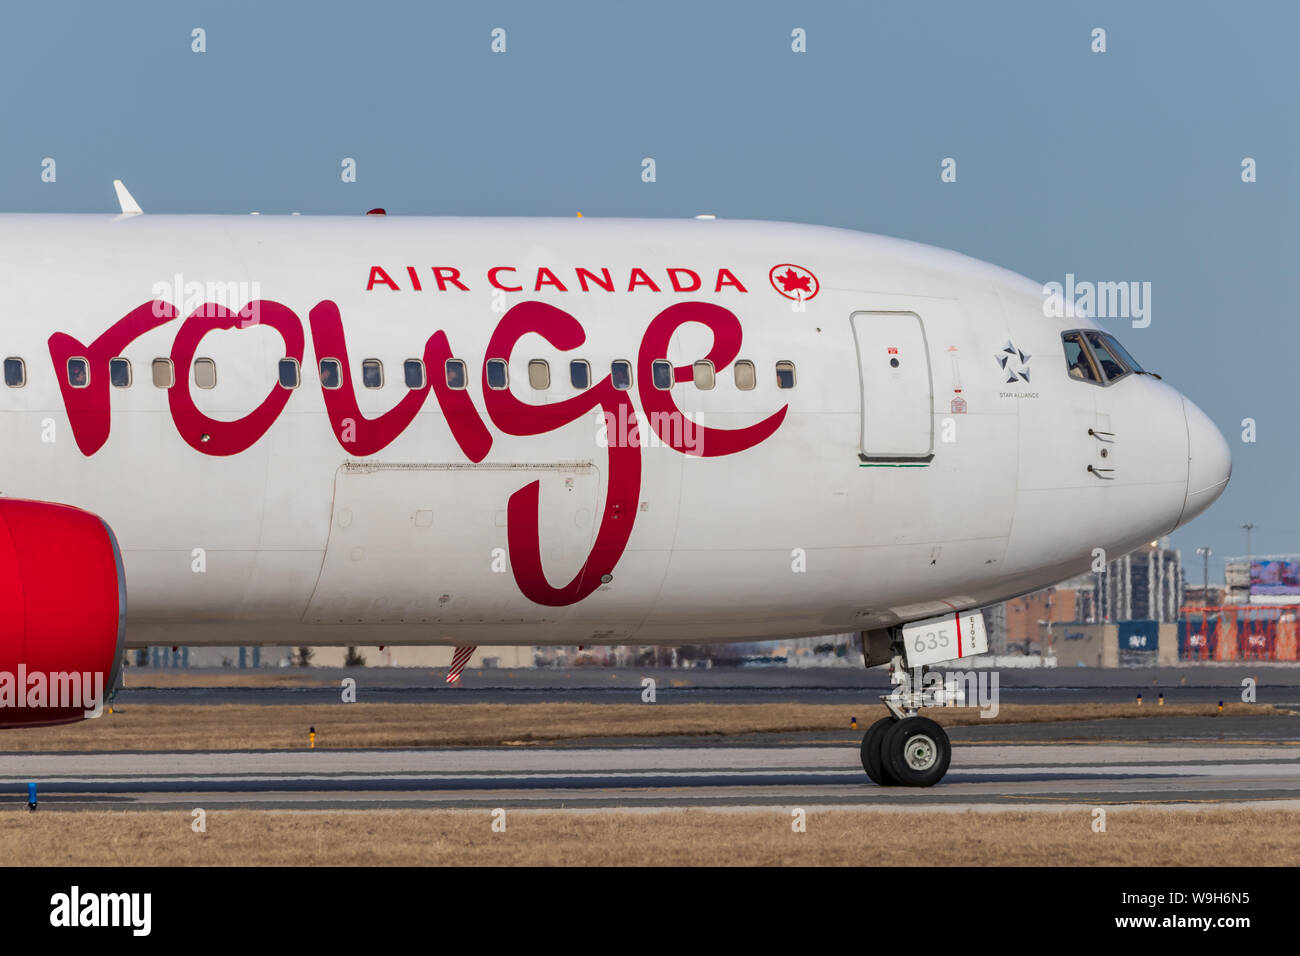 Air Canada Rouge Boeing 767 lining up for takeoff at Toronto Pearson Intl. Airport. Stock Photo